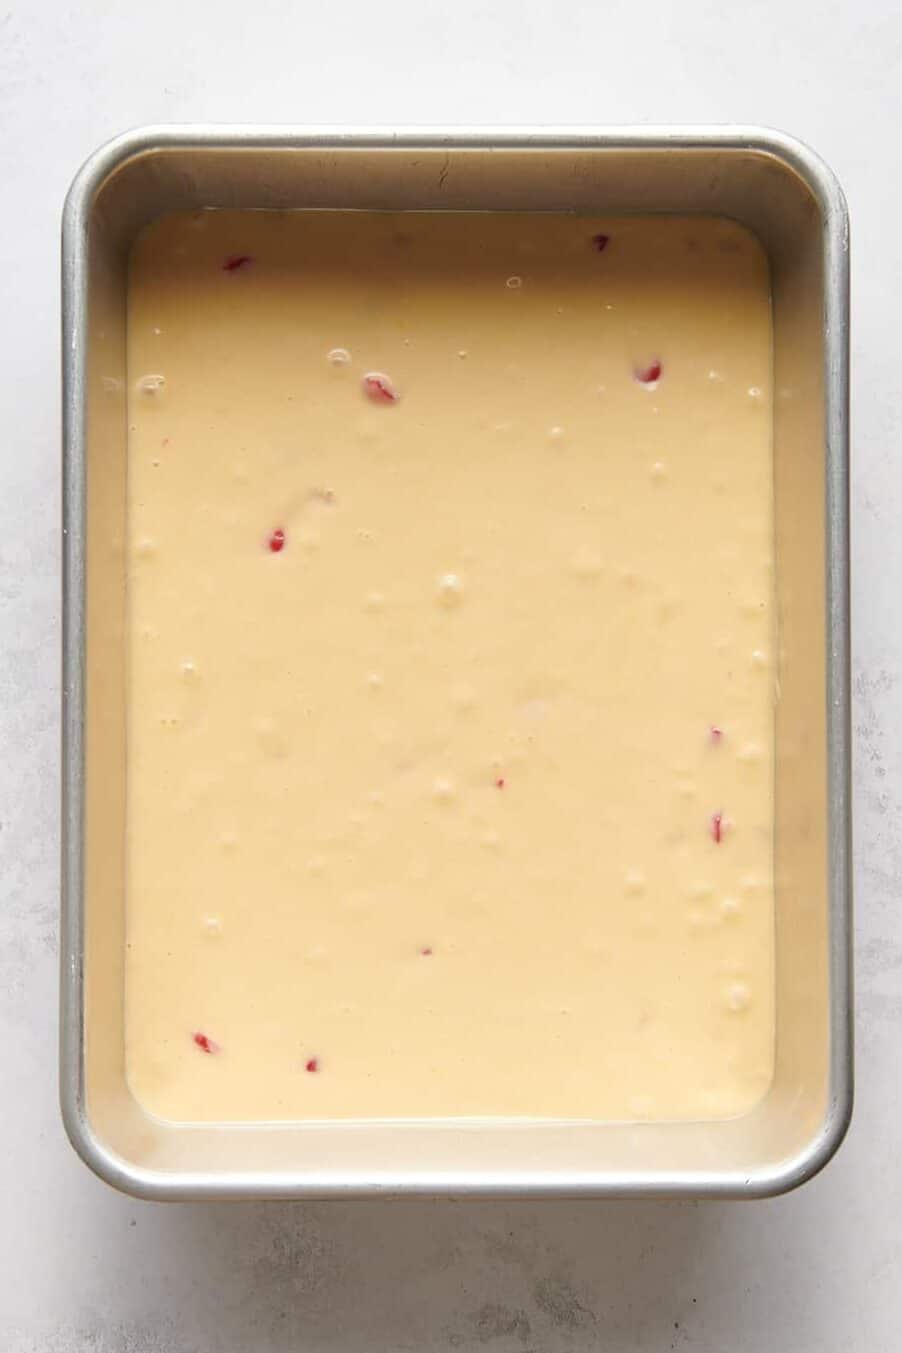 cherry cake batter in a 9x13 baking dish